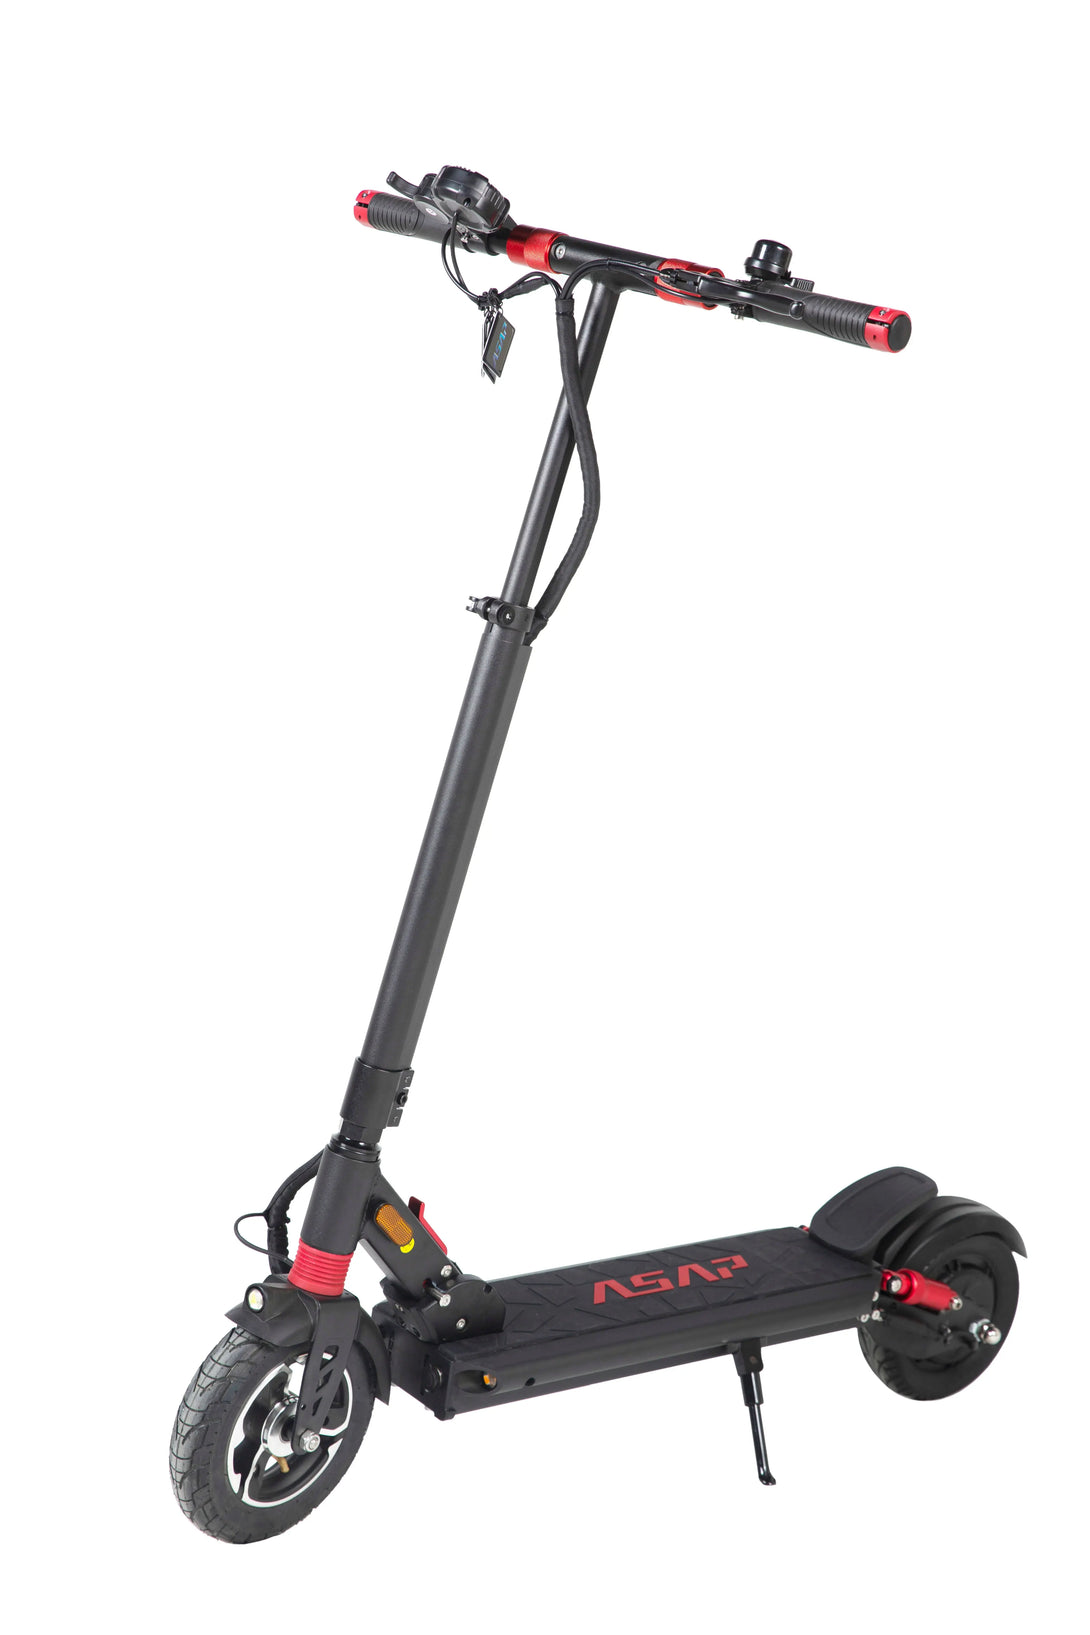 ASAP T8 Upgrade Electric Scooter ASAP SCOOTER